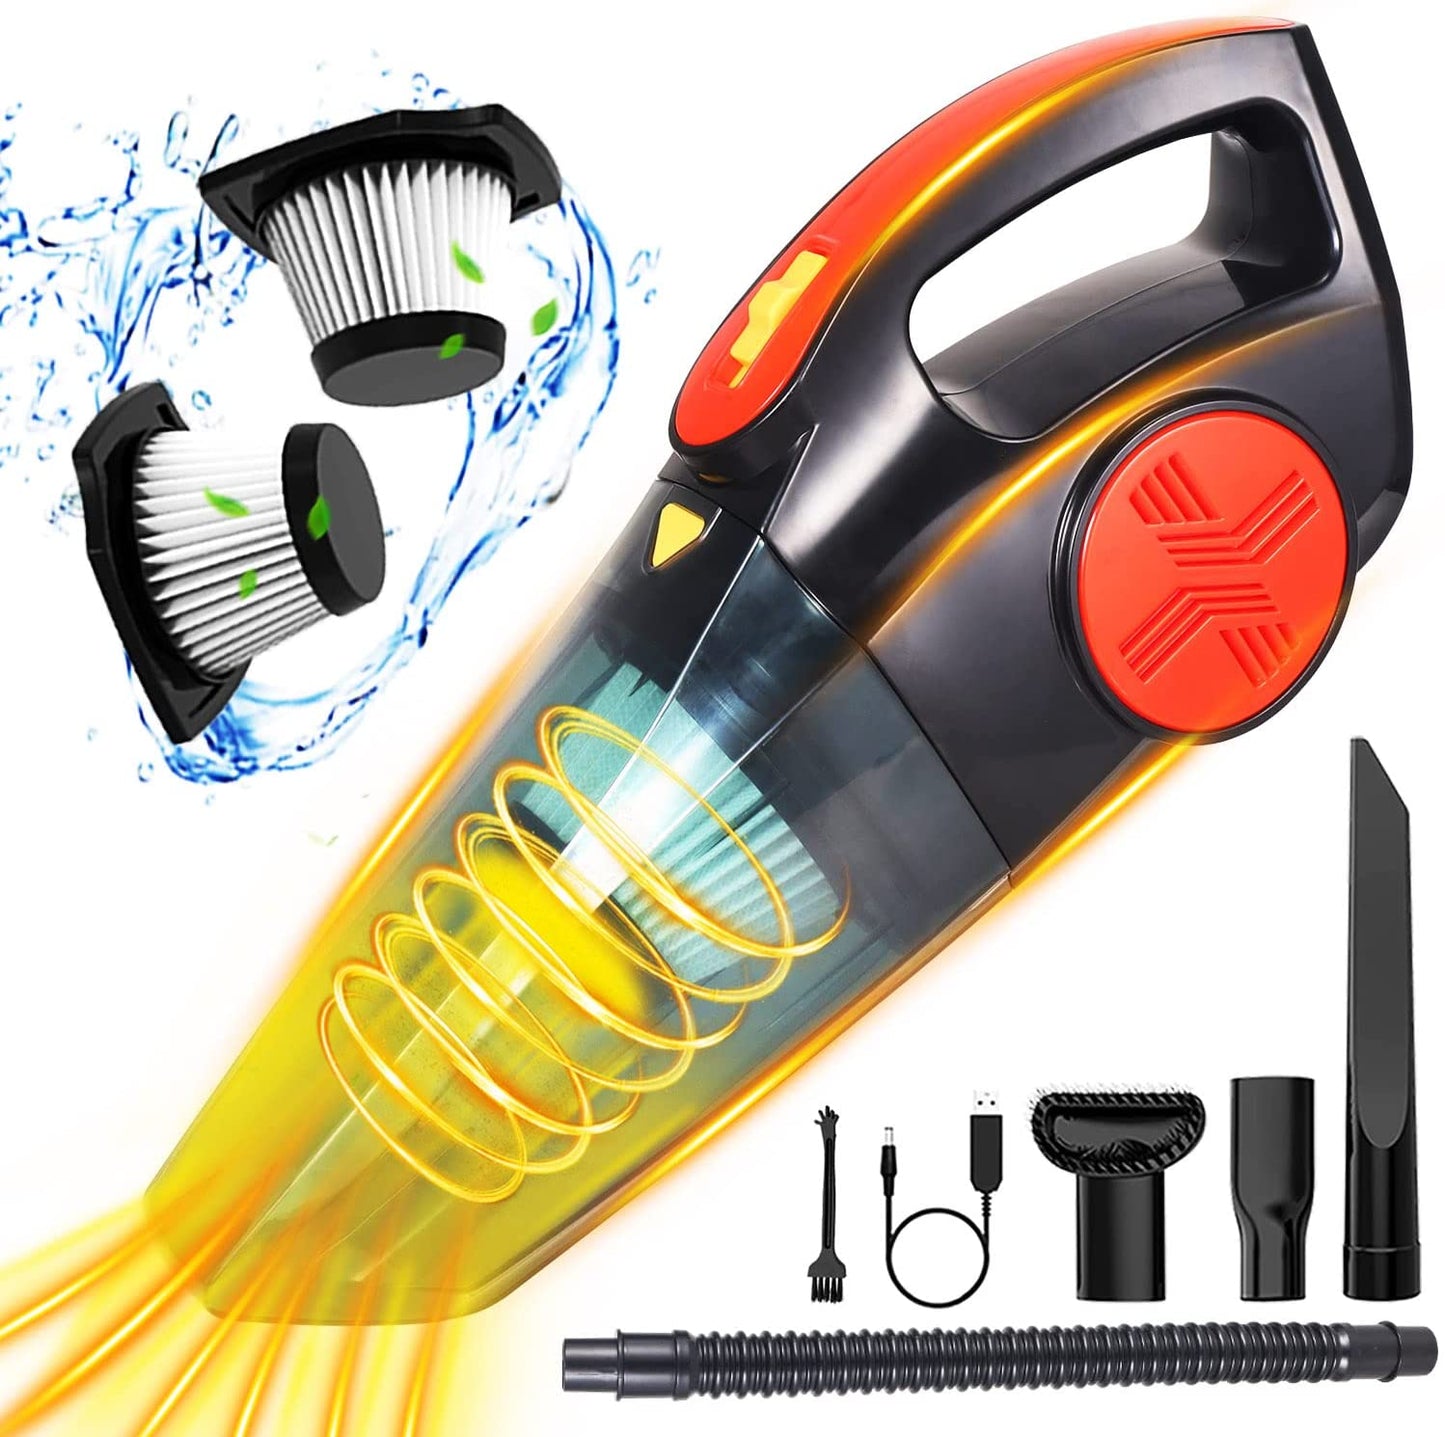 Car Vacuum,Portable Car Vacuum Cordless Cleaner Rechargeable with 120W High Power,Strong Suction,Mini Handheld Car Vacuum for Pet Hair,Home and Car Cleaning